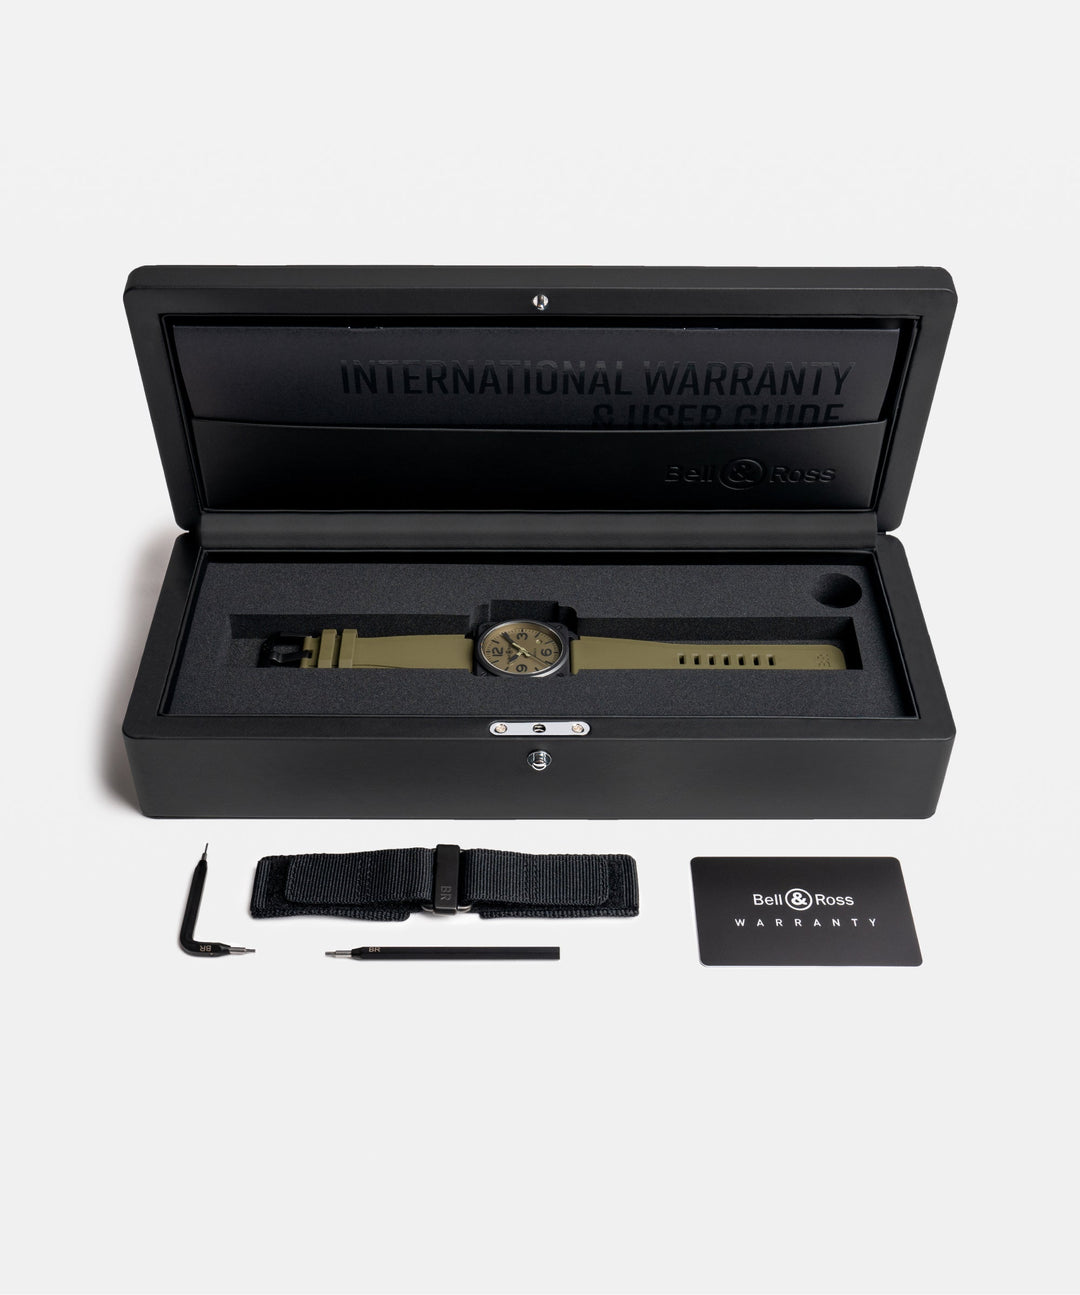 NEW BR 03 MILITARY CERAMIC -  - Bell & Ross - Montre - Les Champs d'Or